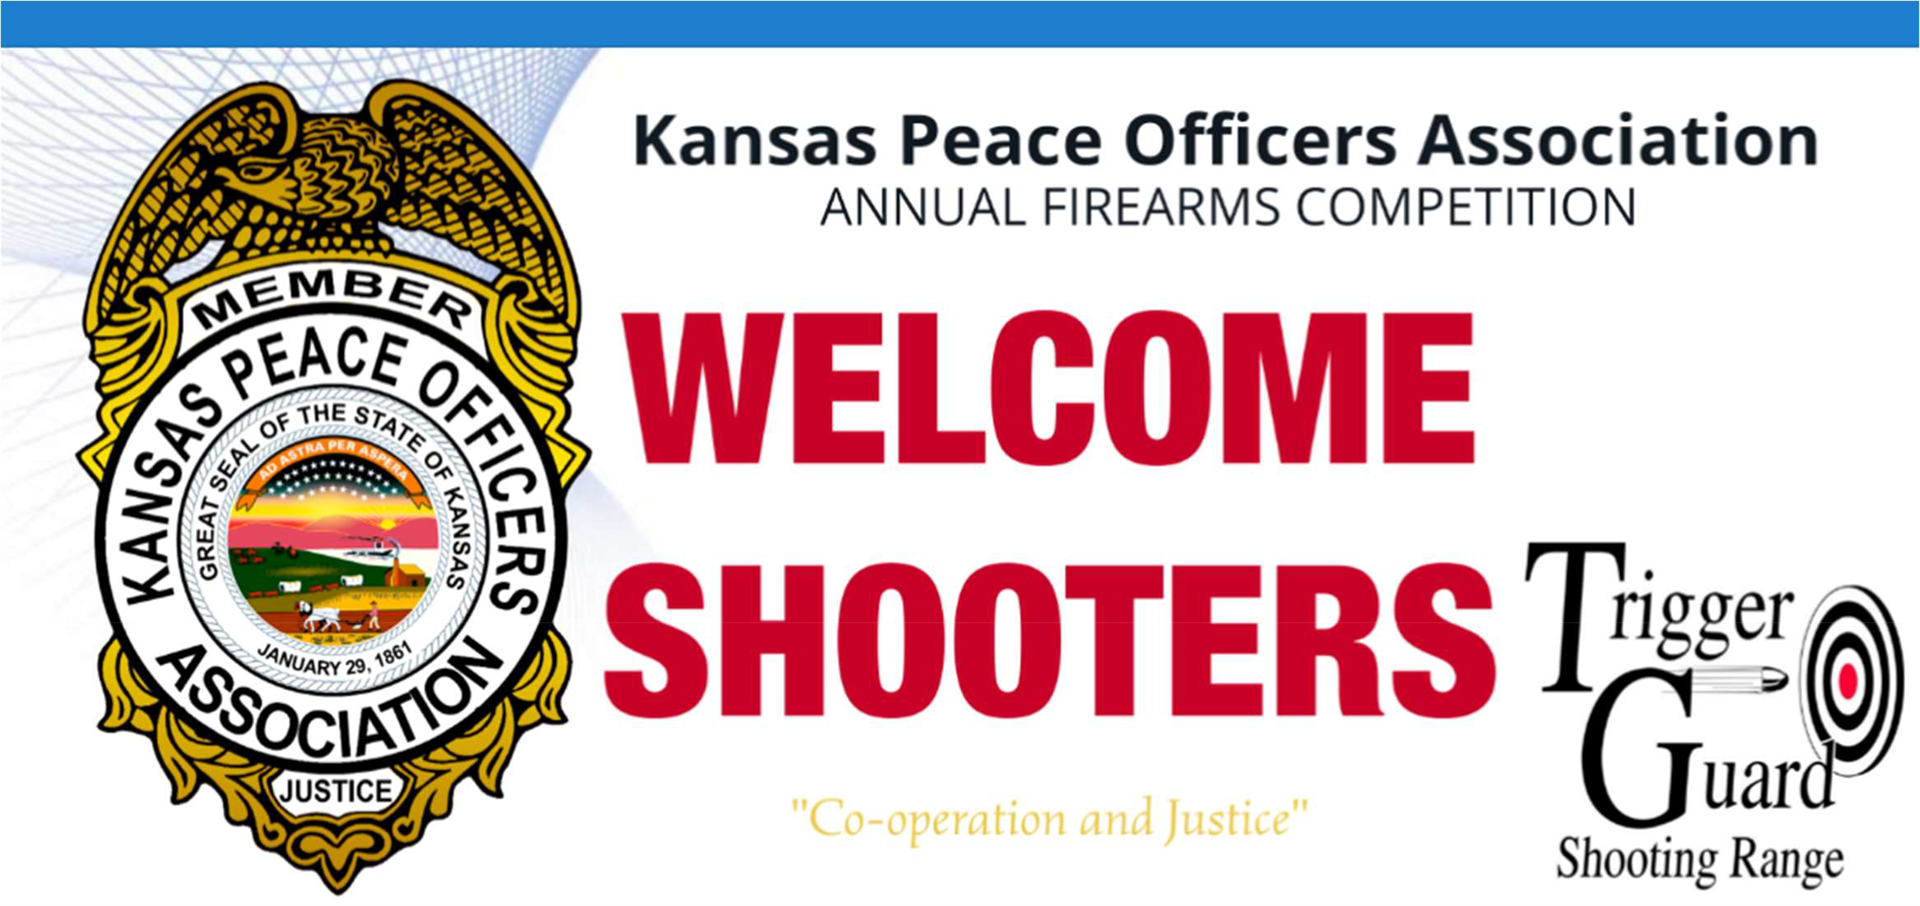 KPOA Firearms Competition